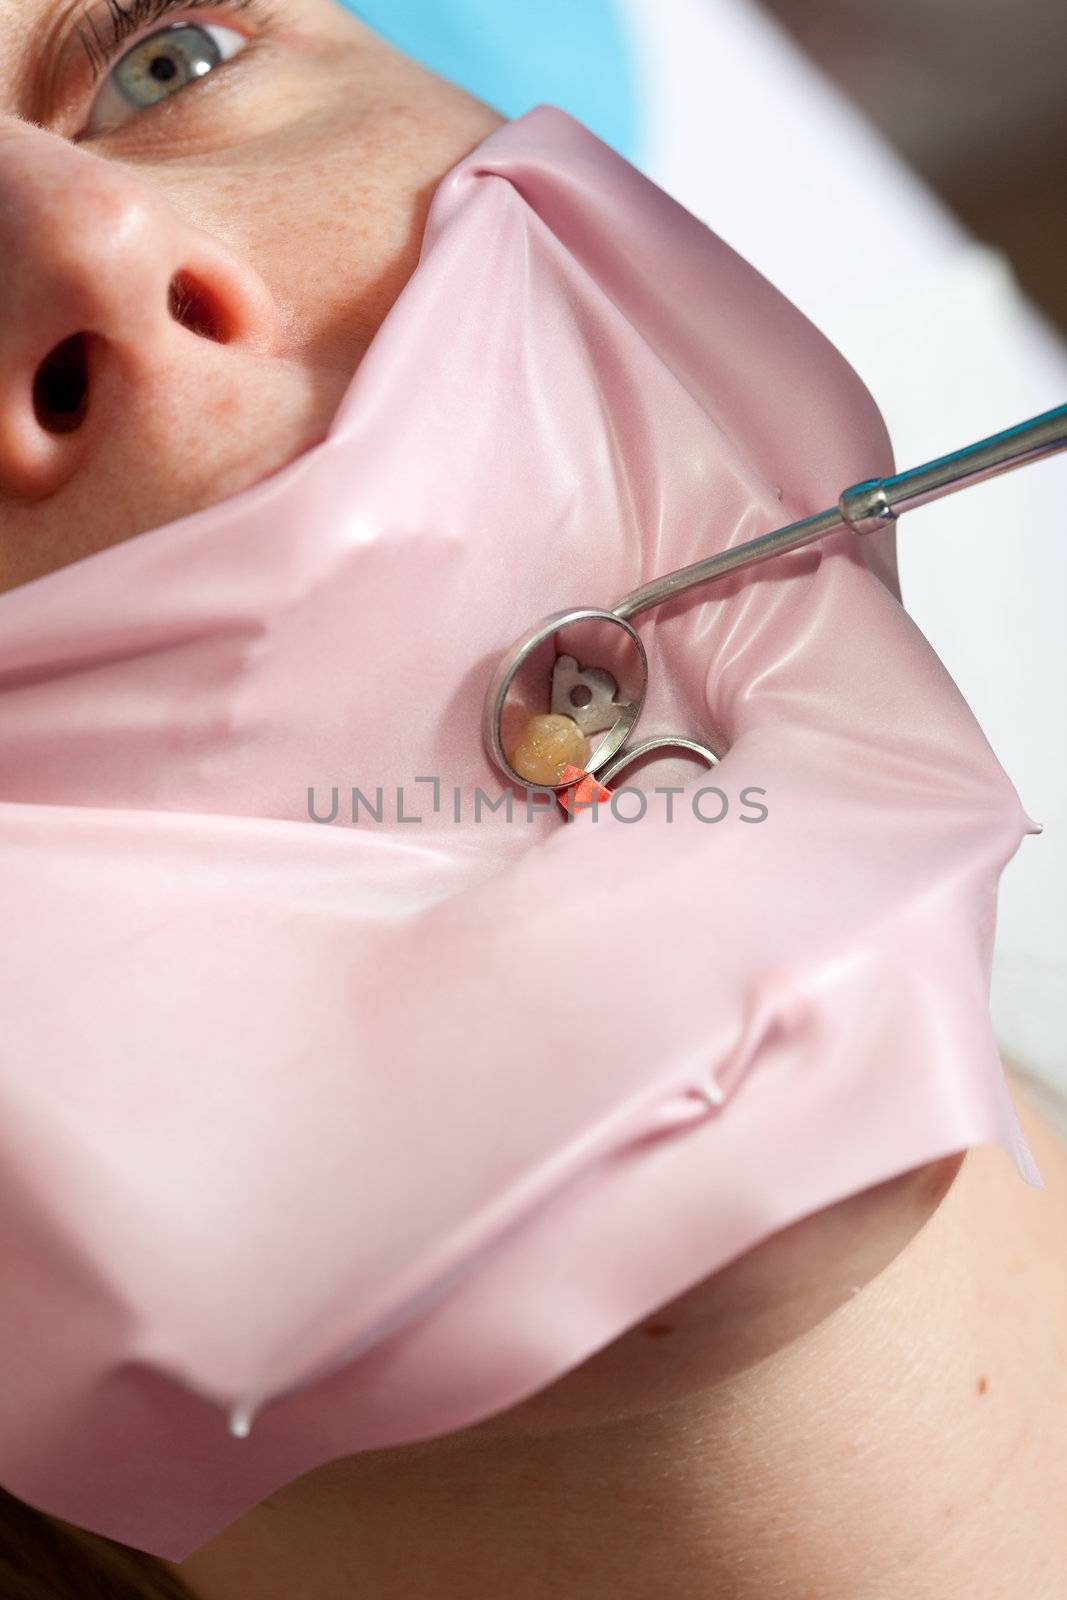 Patient lying with her mouth open with a protective silicon casing around one of her teeth